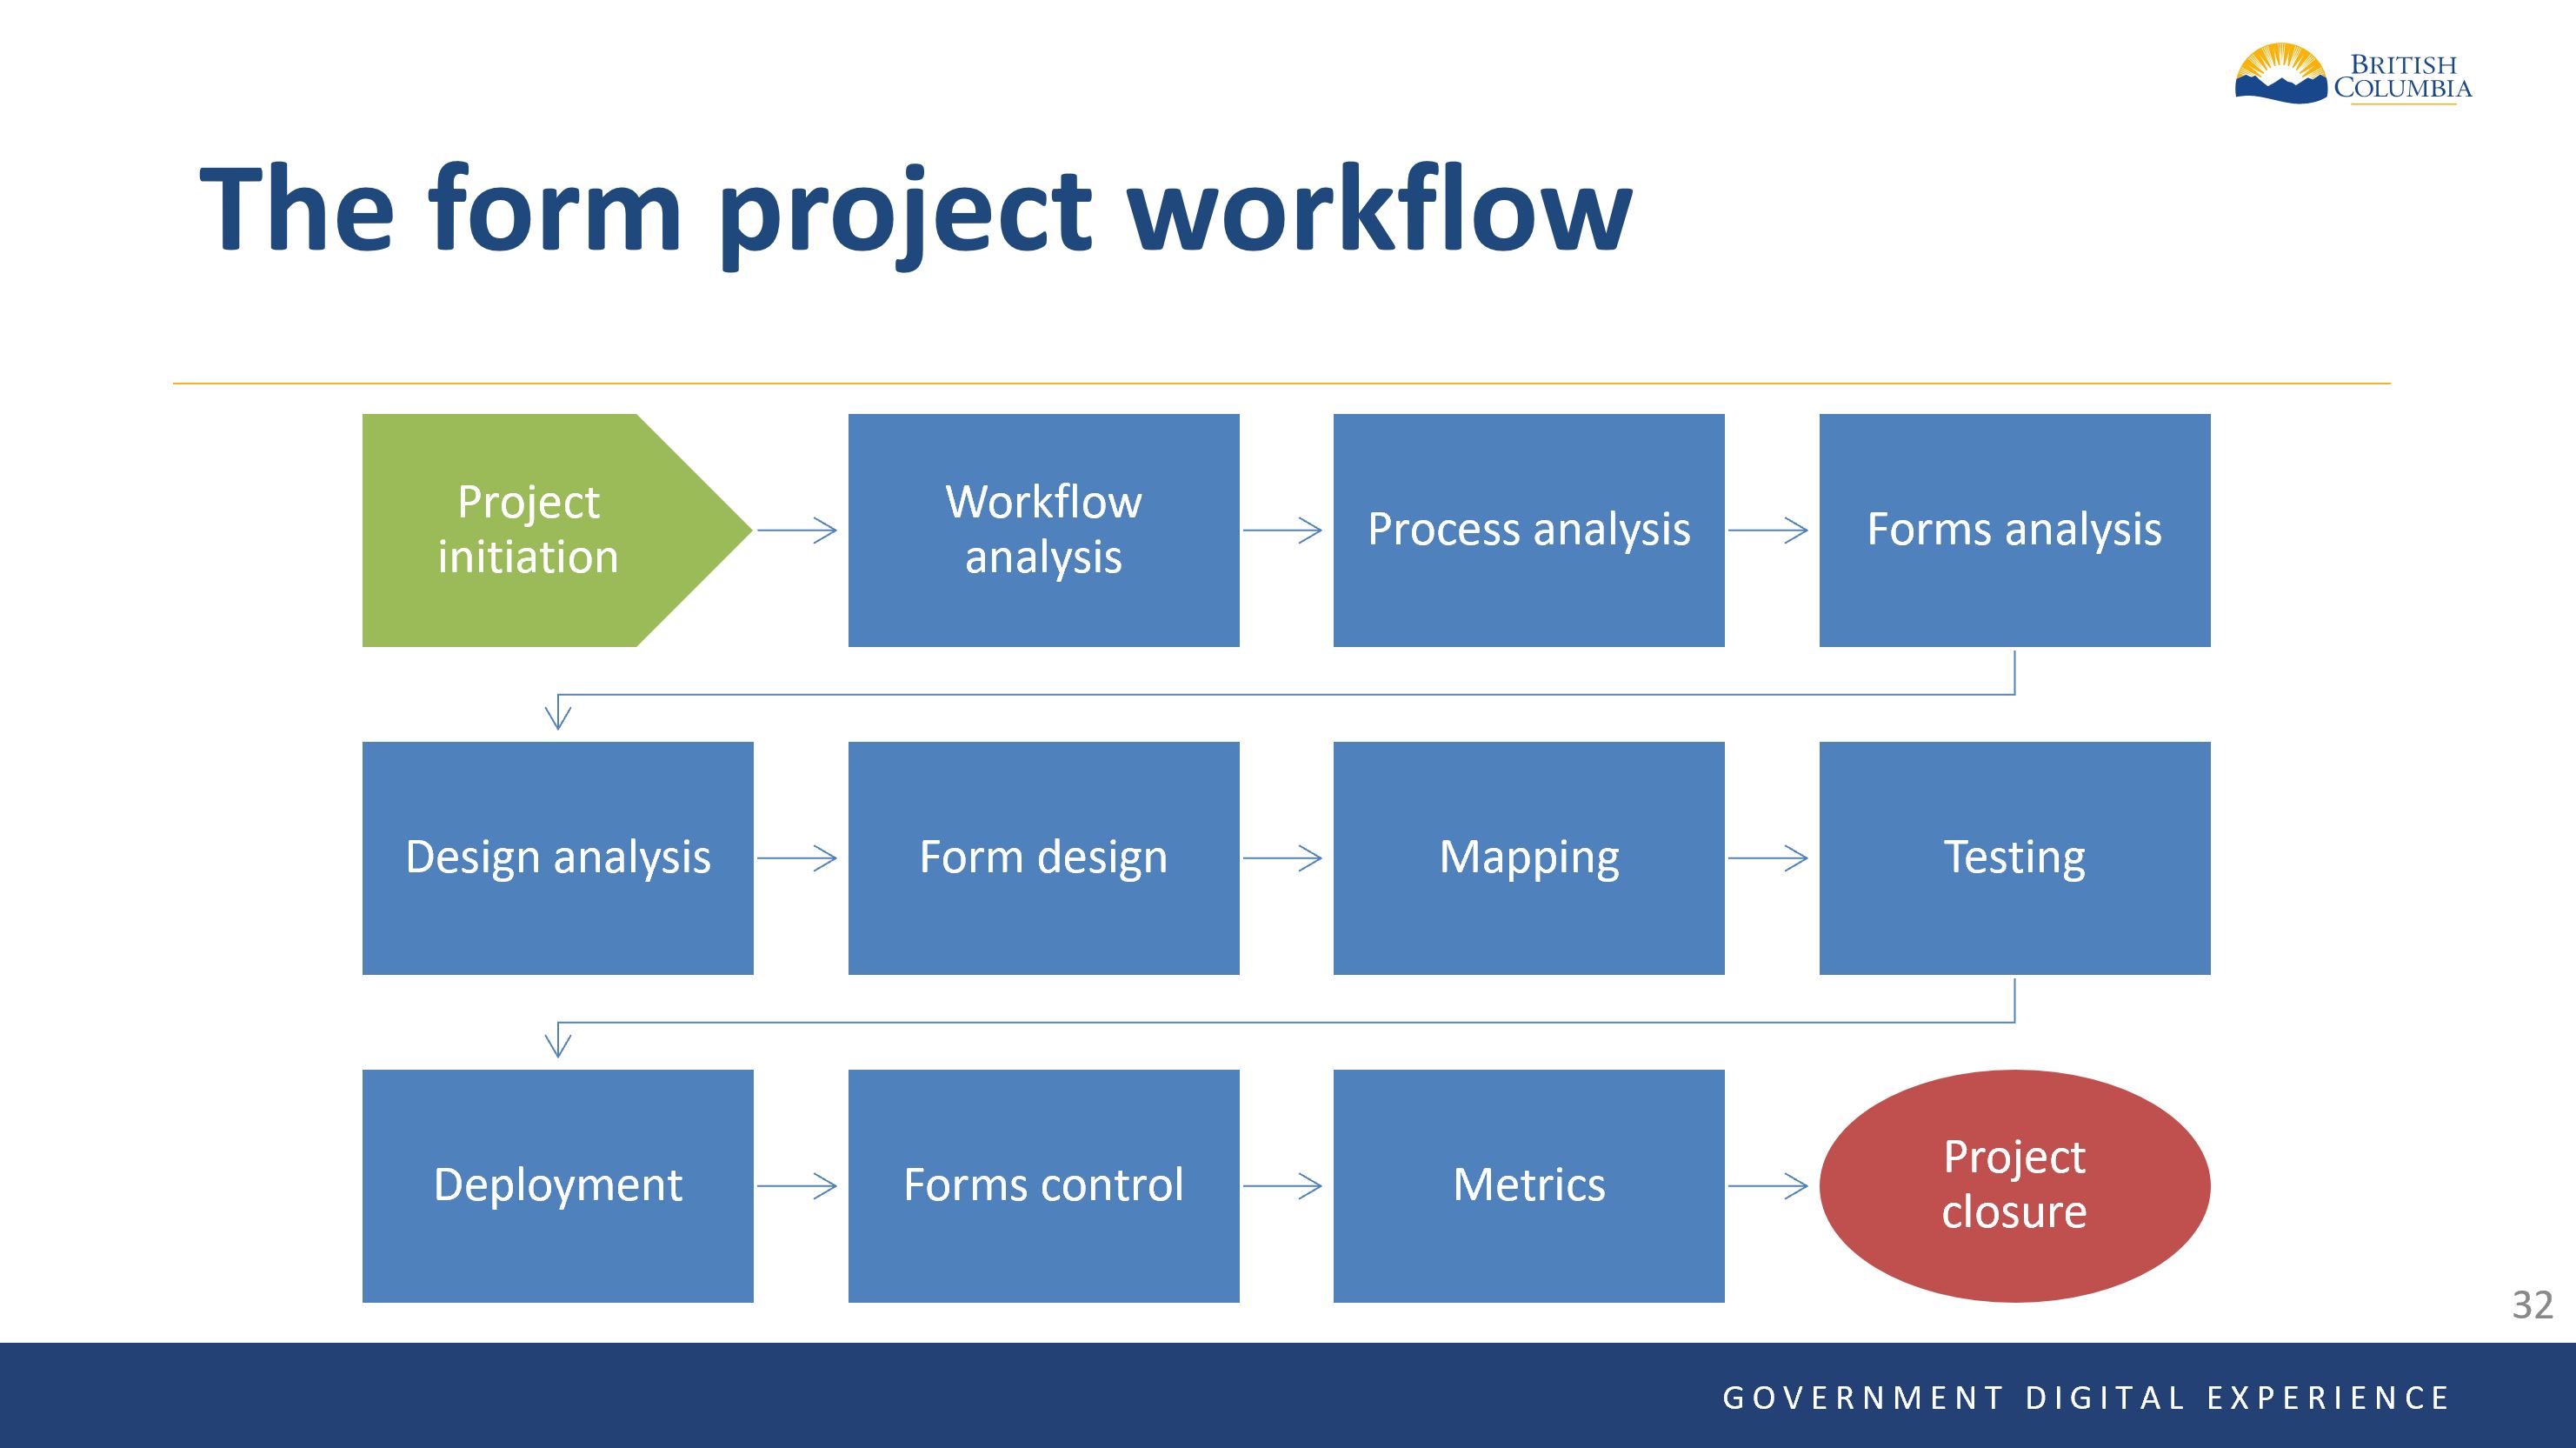 The form project workflow. Click to view a larger PDF (downloadable) version.